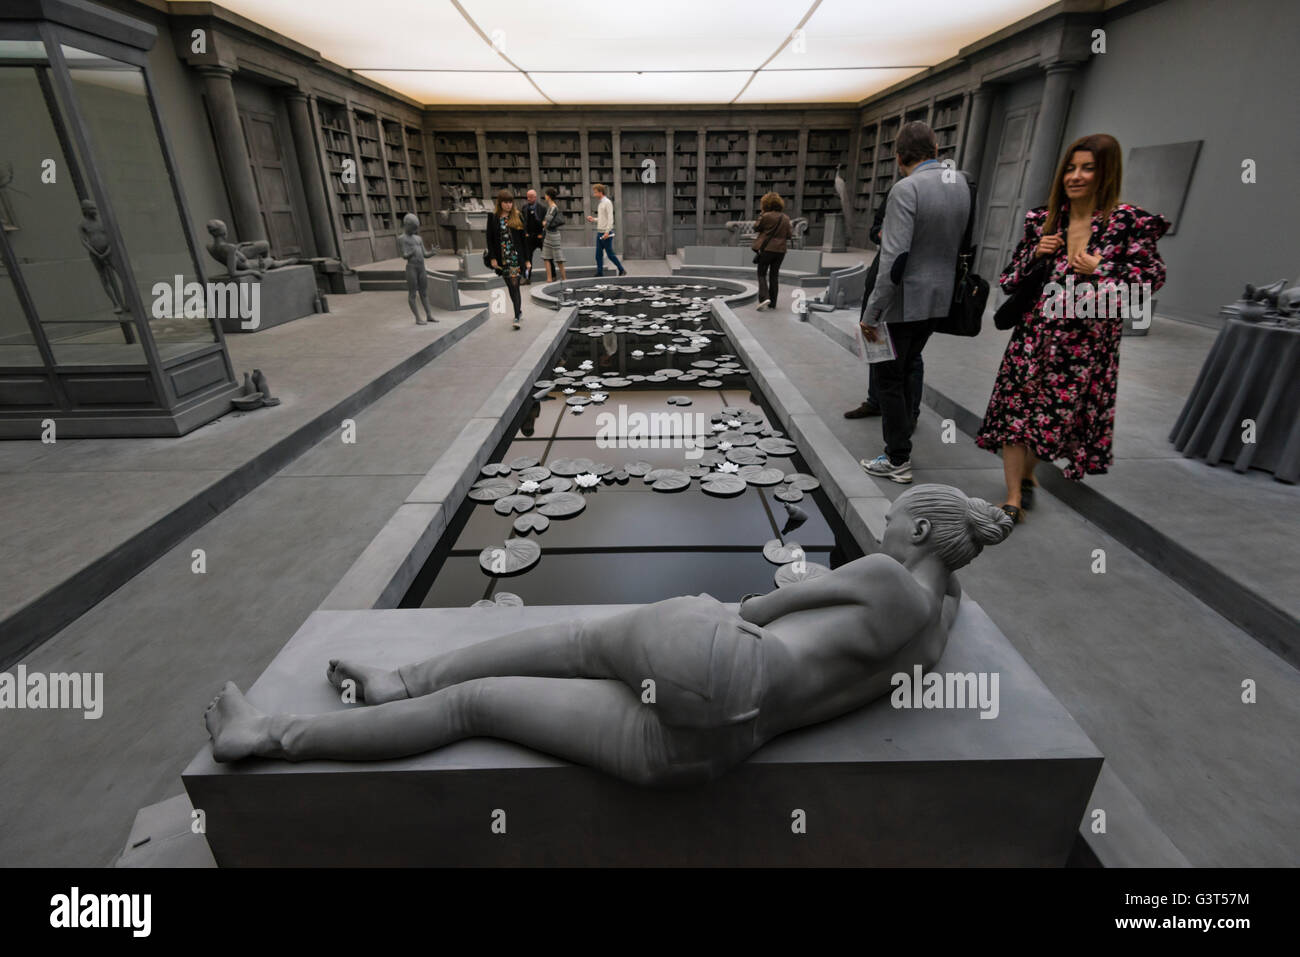 Basel, Switzerland. 14 June, 2016. Inside the installation "The Collector's House" by Hans Op de Beeck at the modern art show "Art Basel 2016" in Basel, Switzerland. With 280 galleries showing works from 4,000 artists, Art Basel is one of the world's largest and most spectacular gatherings for contemporary and modern art. In 2015, the show in Basel (which also has offshoots in Hong Kong and Miami) attracted 98,000 visitors from all over the world. Credit:  Erik Tham/Alamy Live News Stock Photo